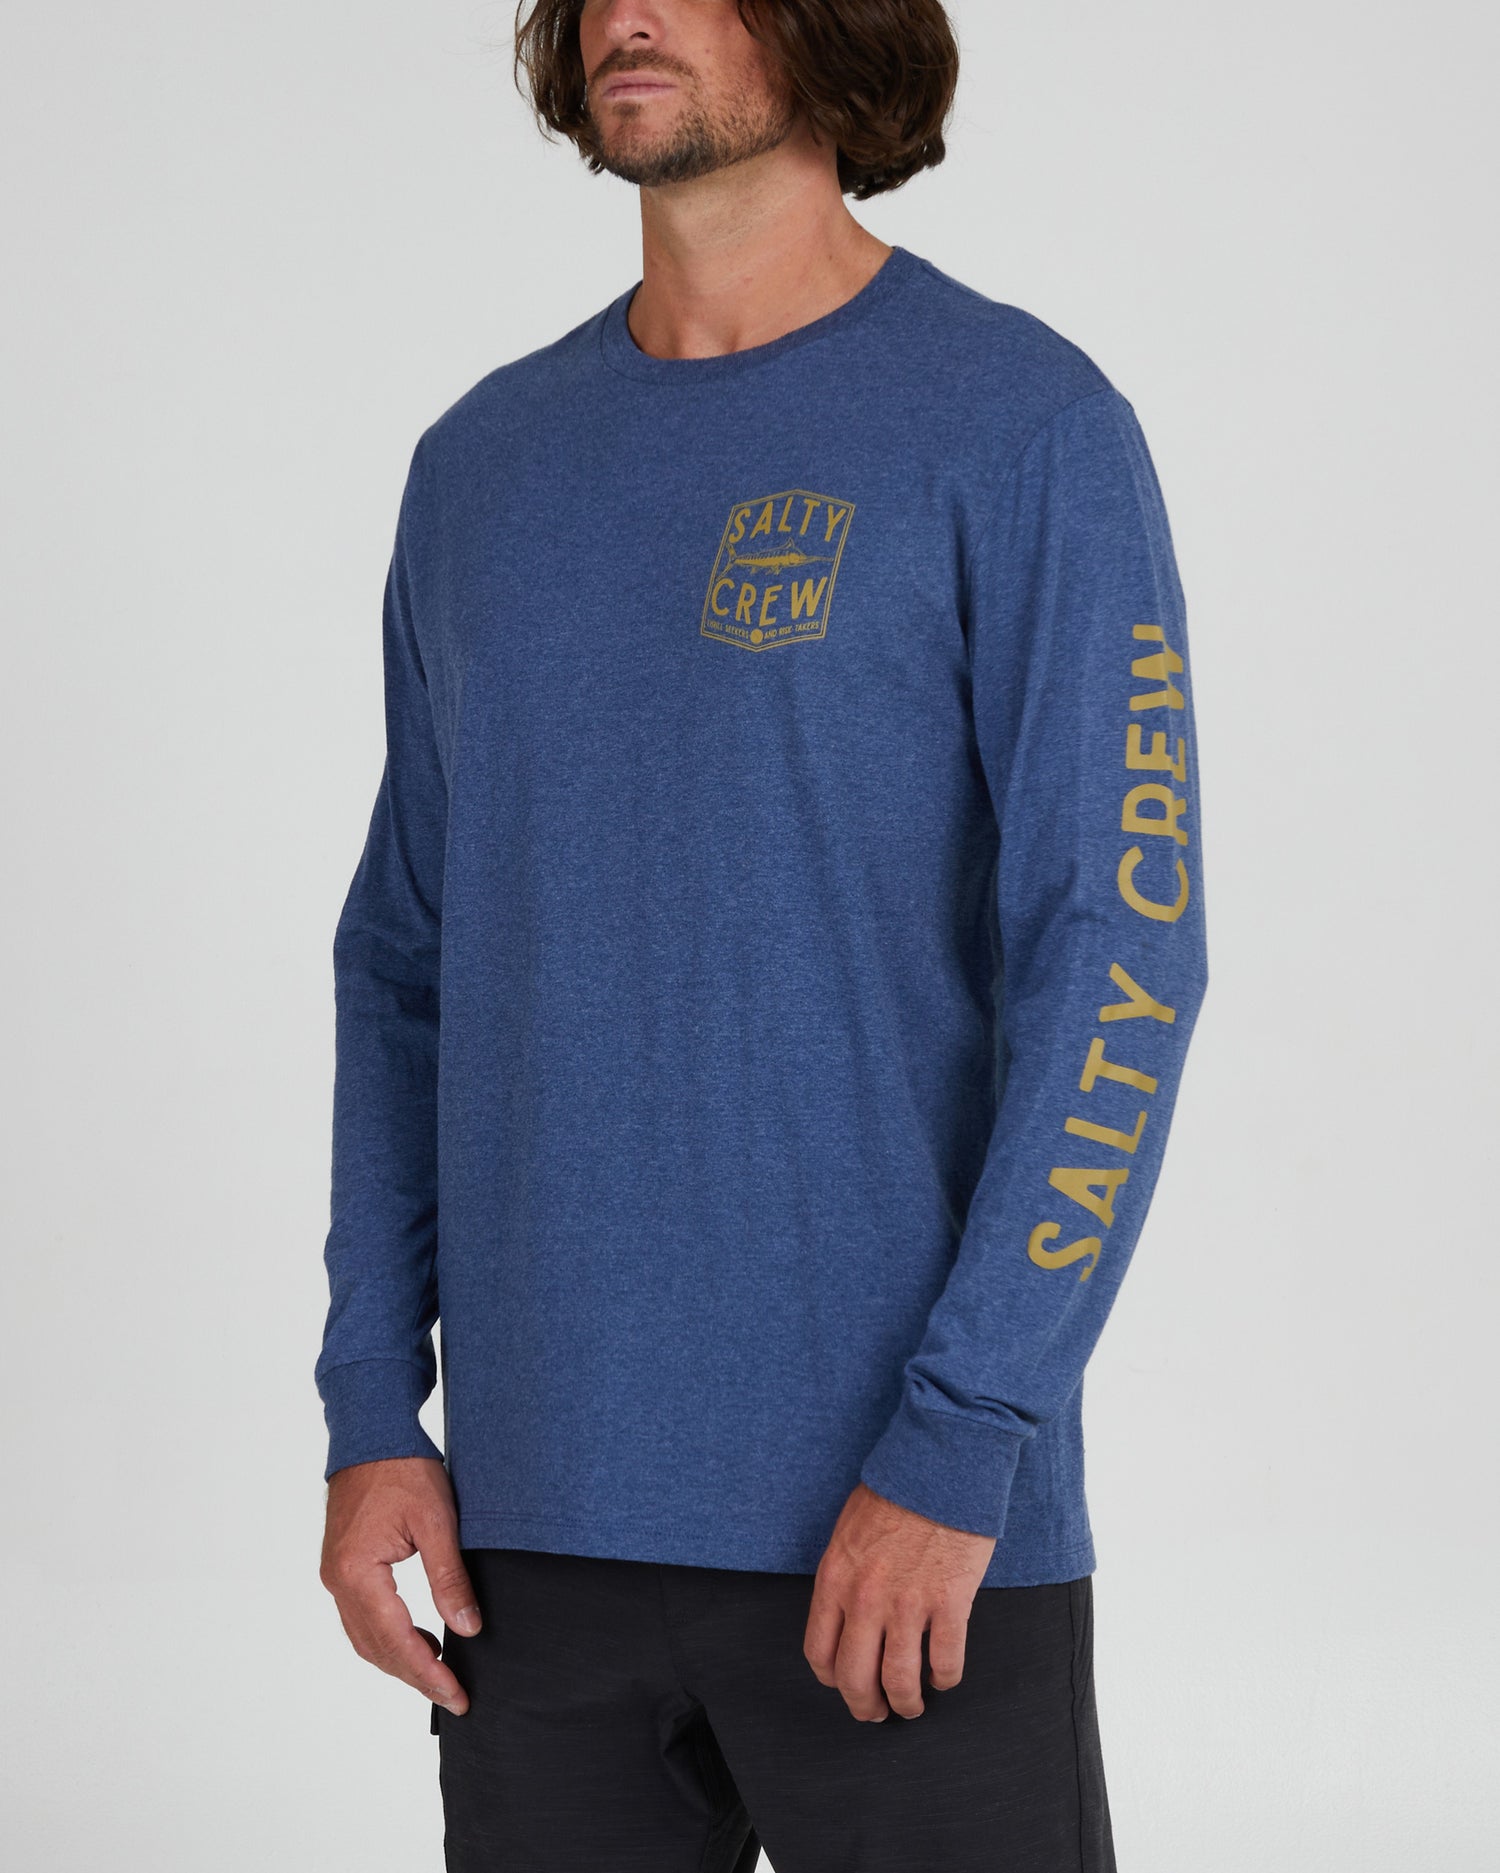 On body front angle of the Fishery Navy Heather L/S Standard Tee